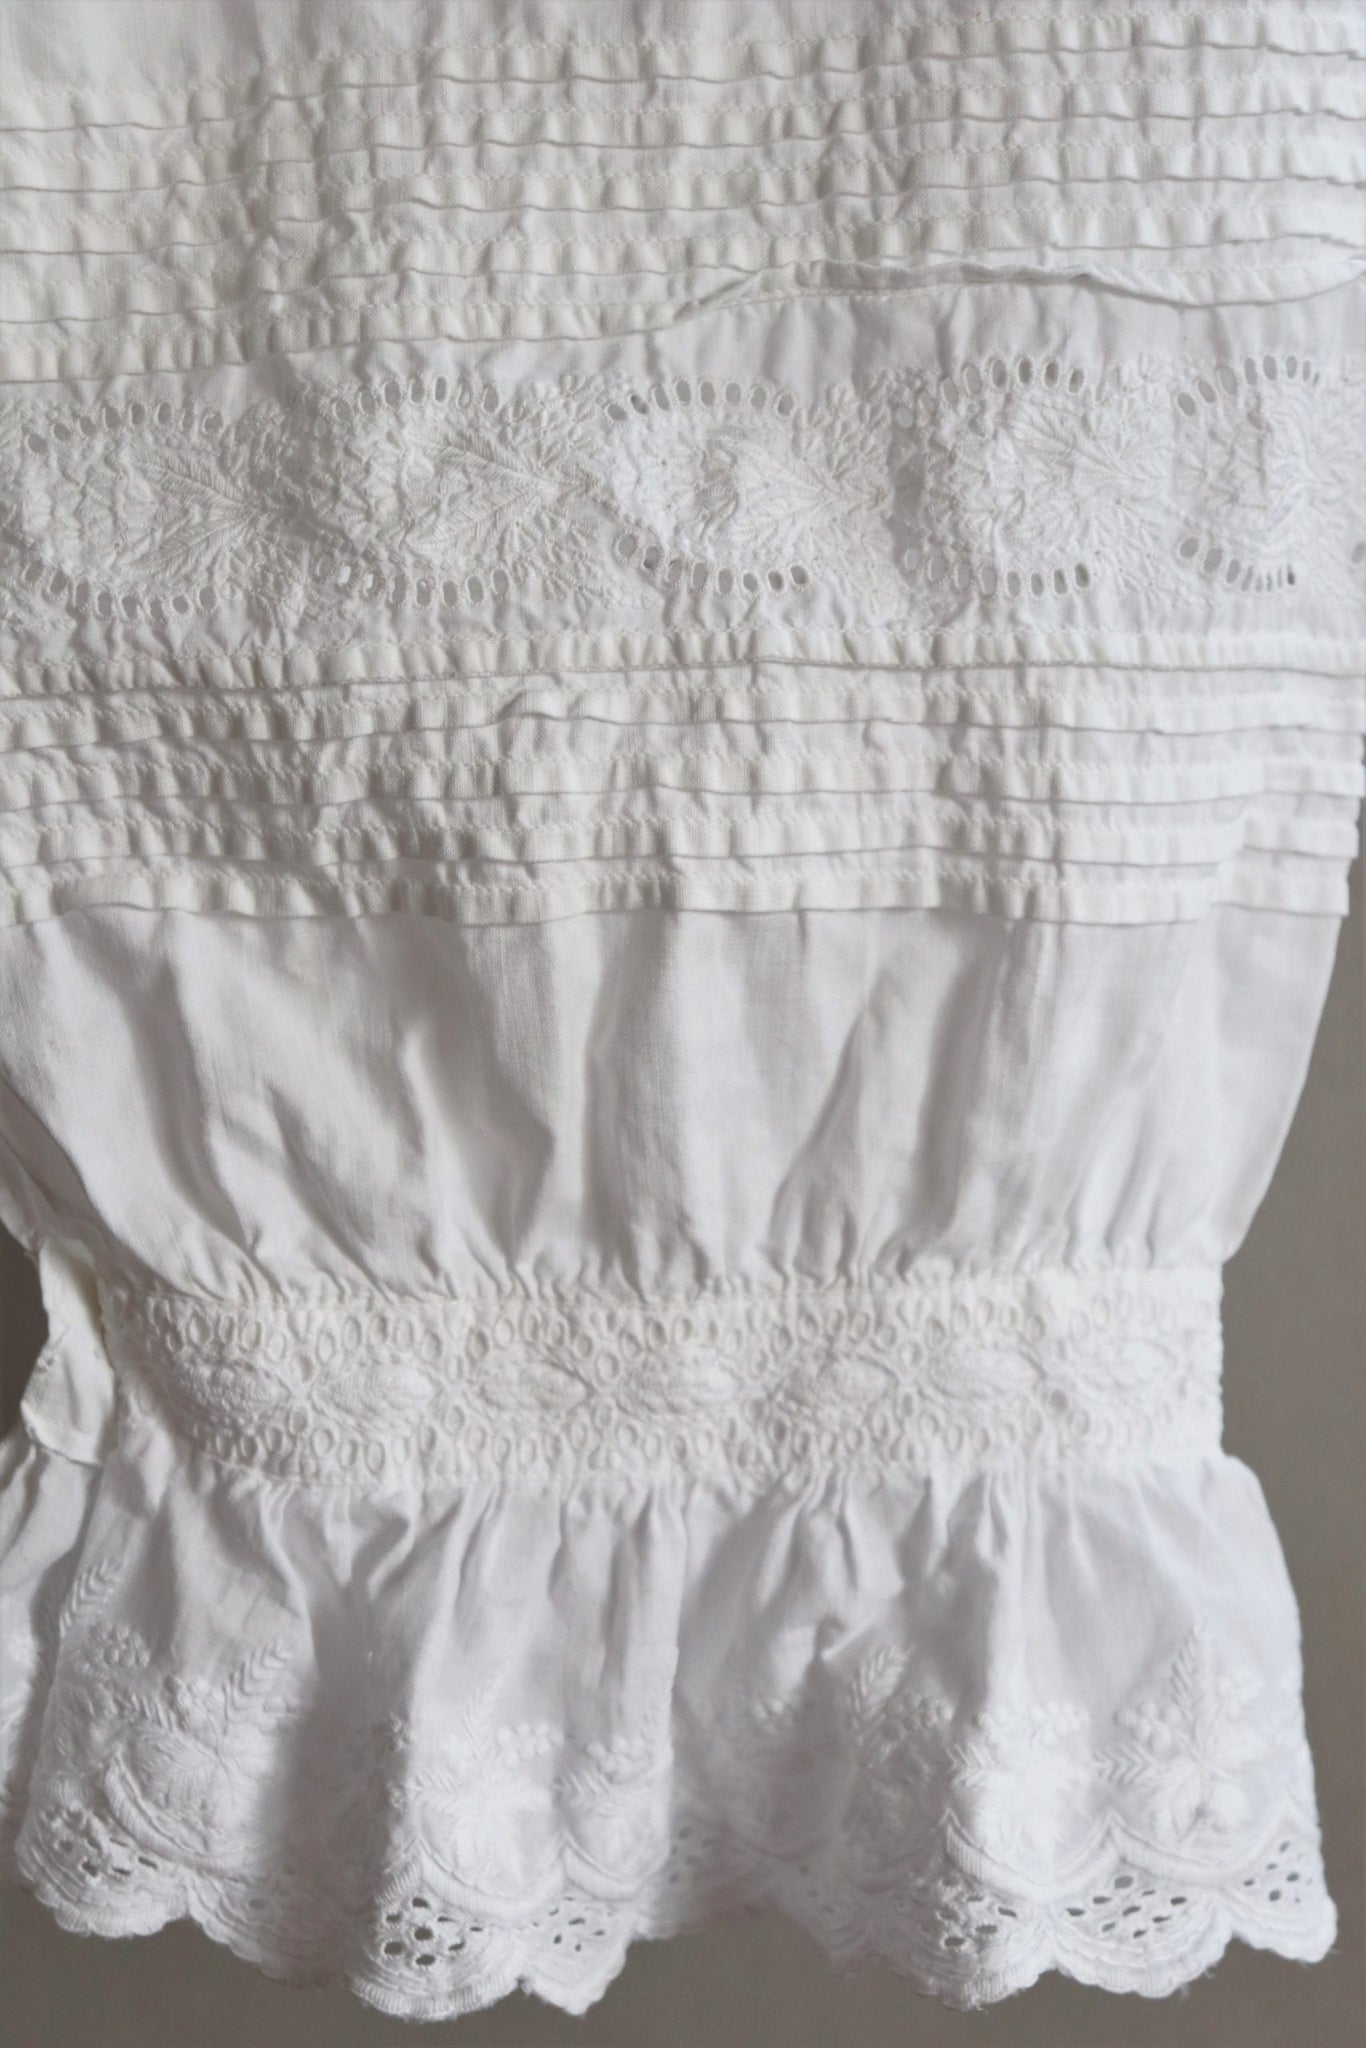 Antique Bloomers Pants From 1890 to 1900